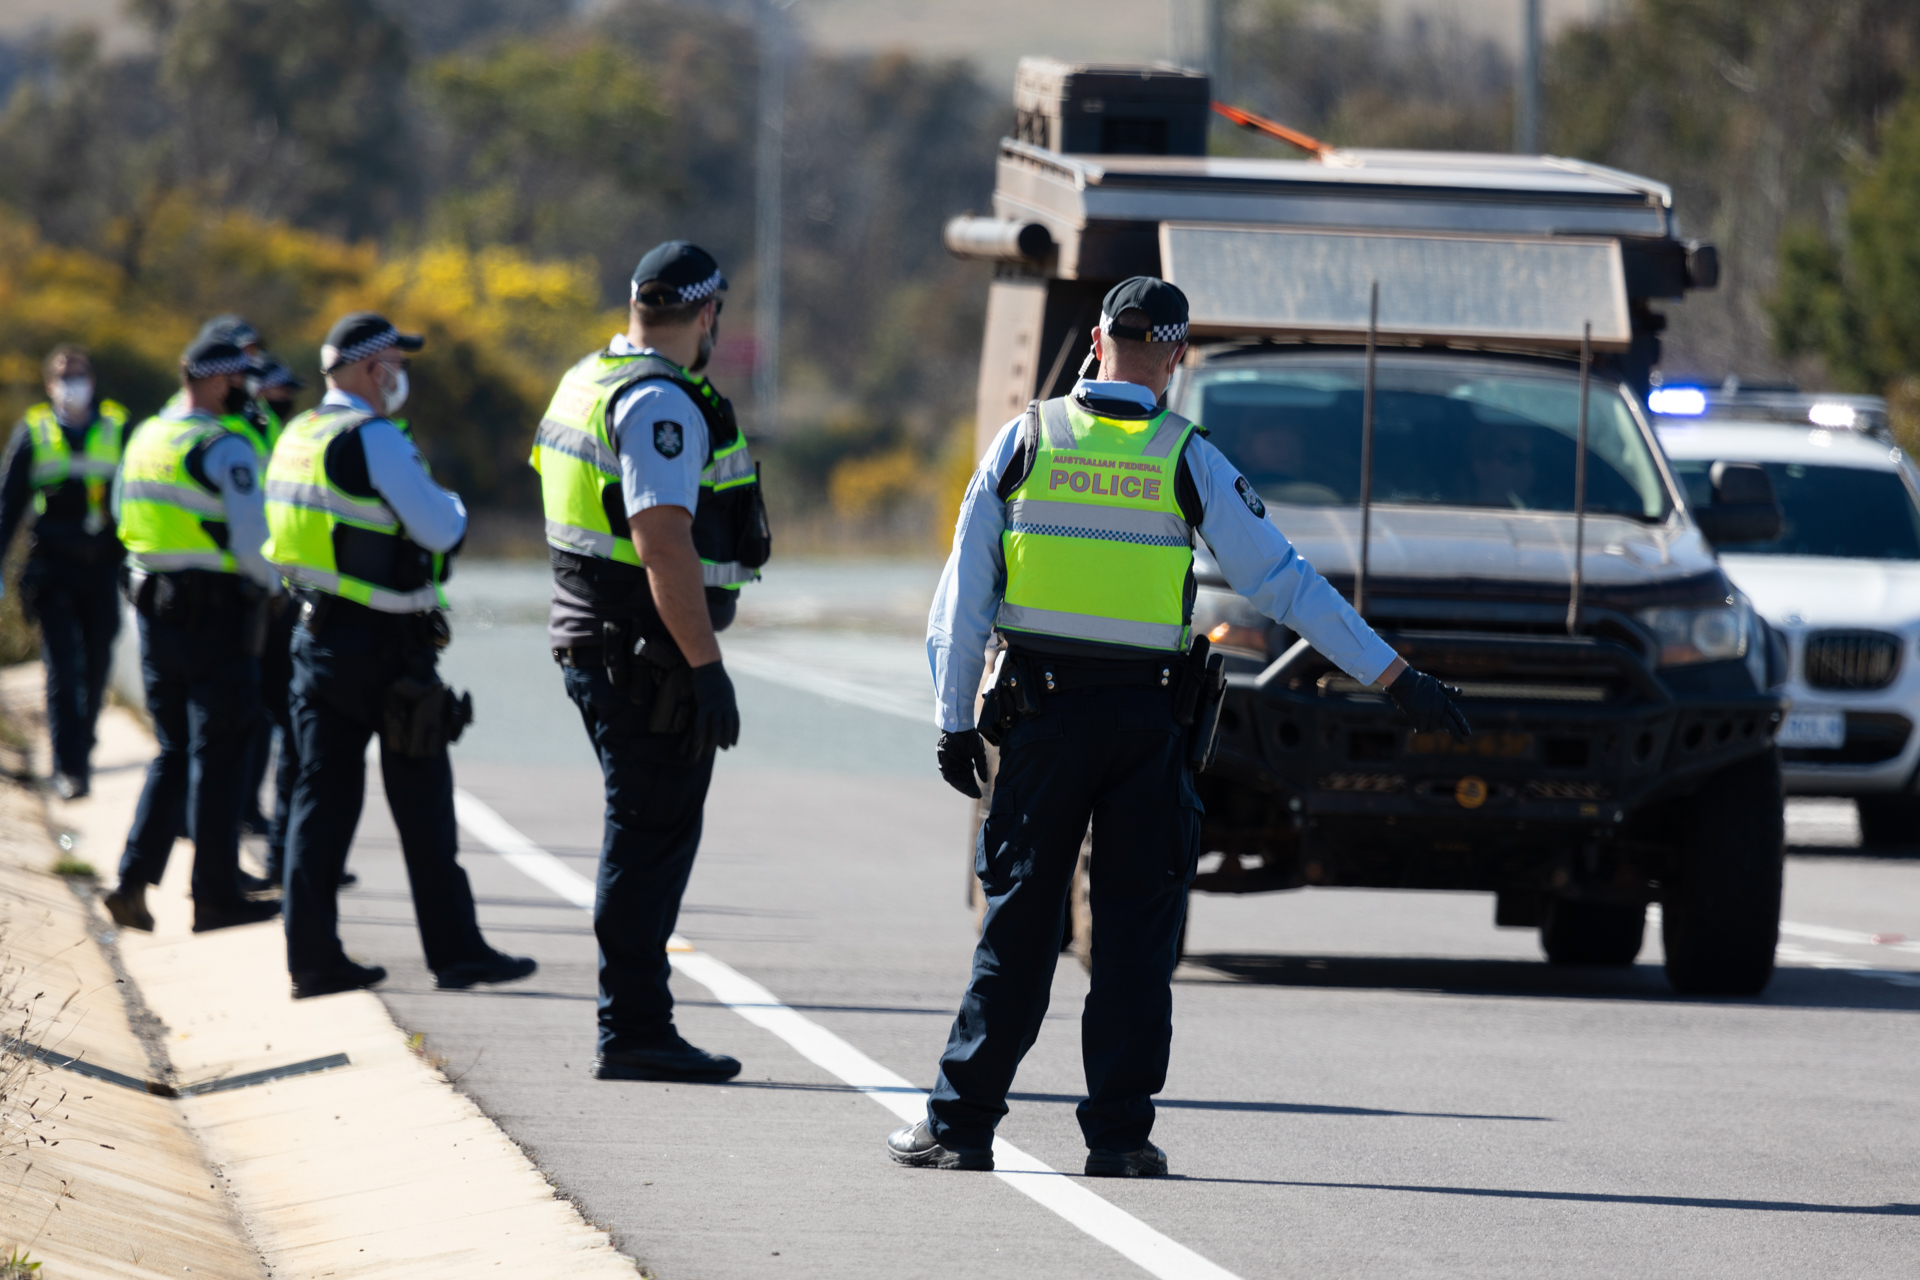 All of regional NSW plunged into lockdown, fines increased to $5000 for noncompliance